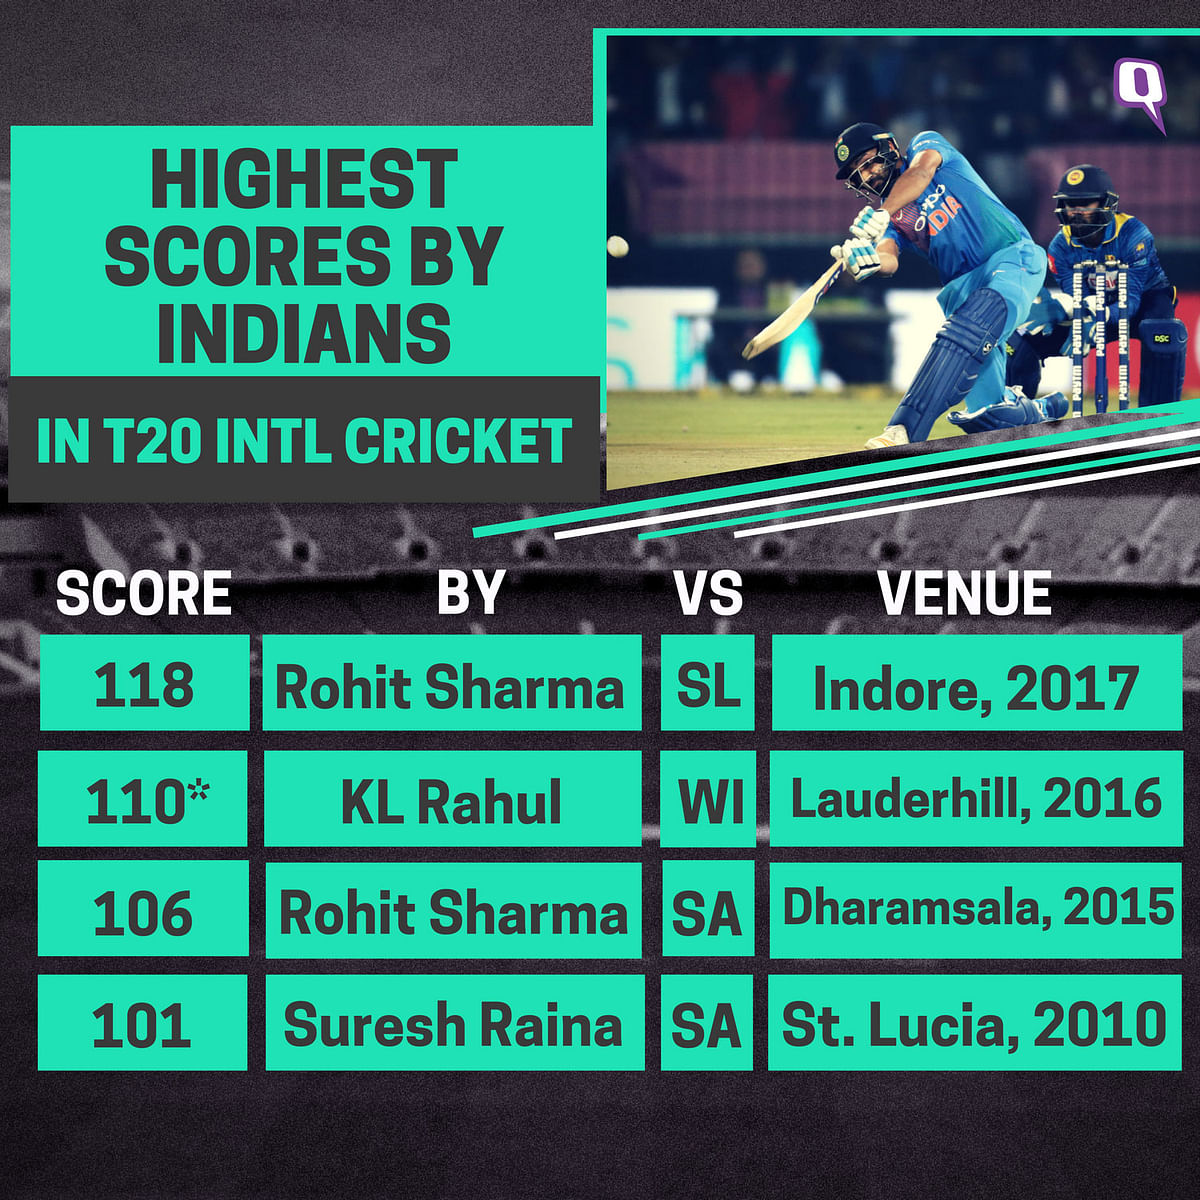 Rohit Sharma took just 35 balls to reach his second T20I century.